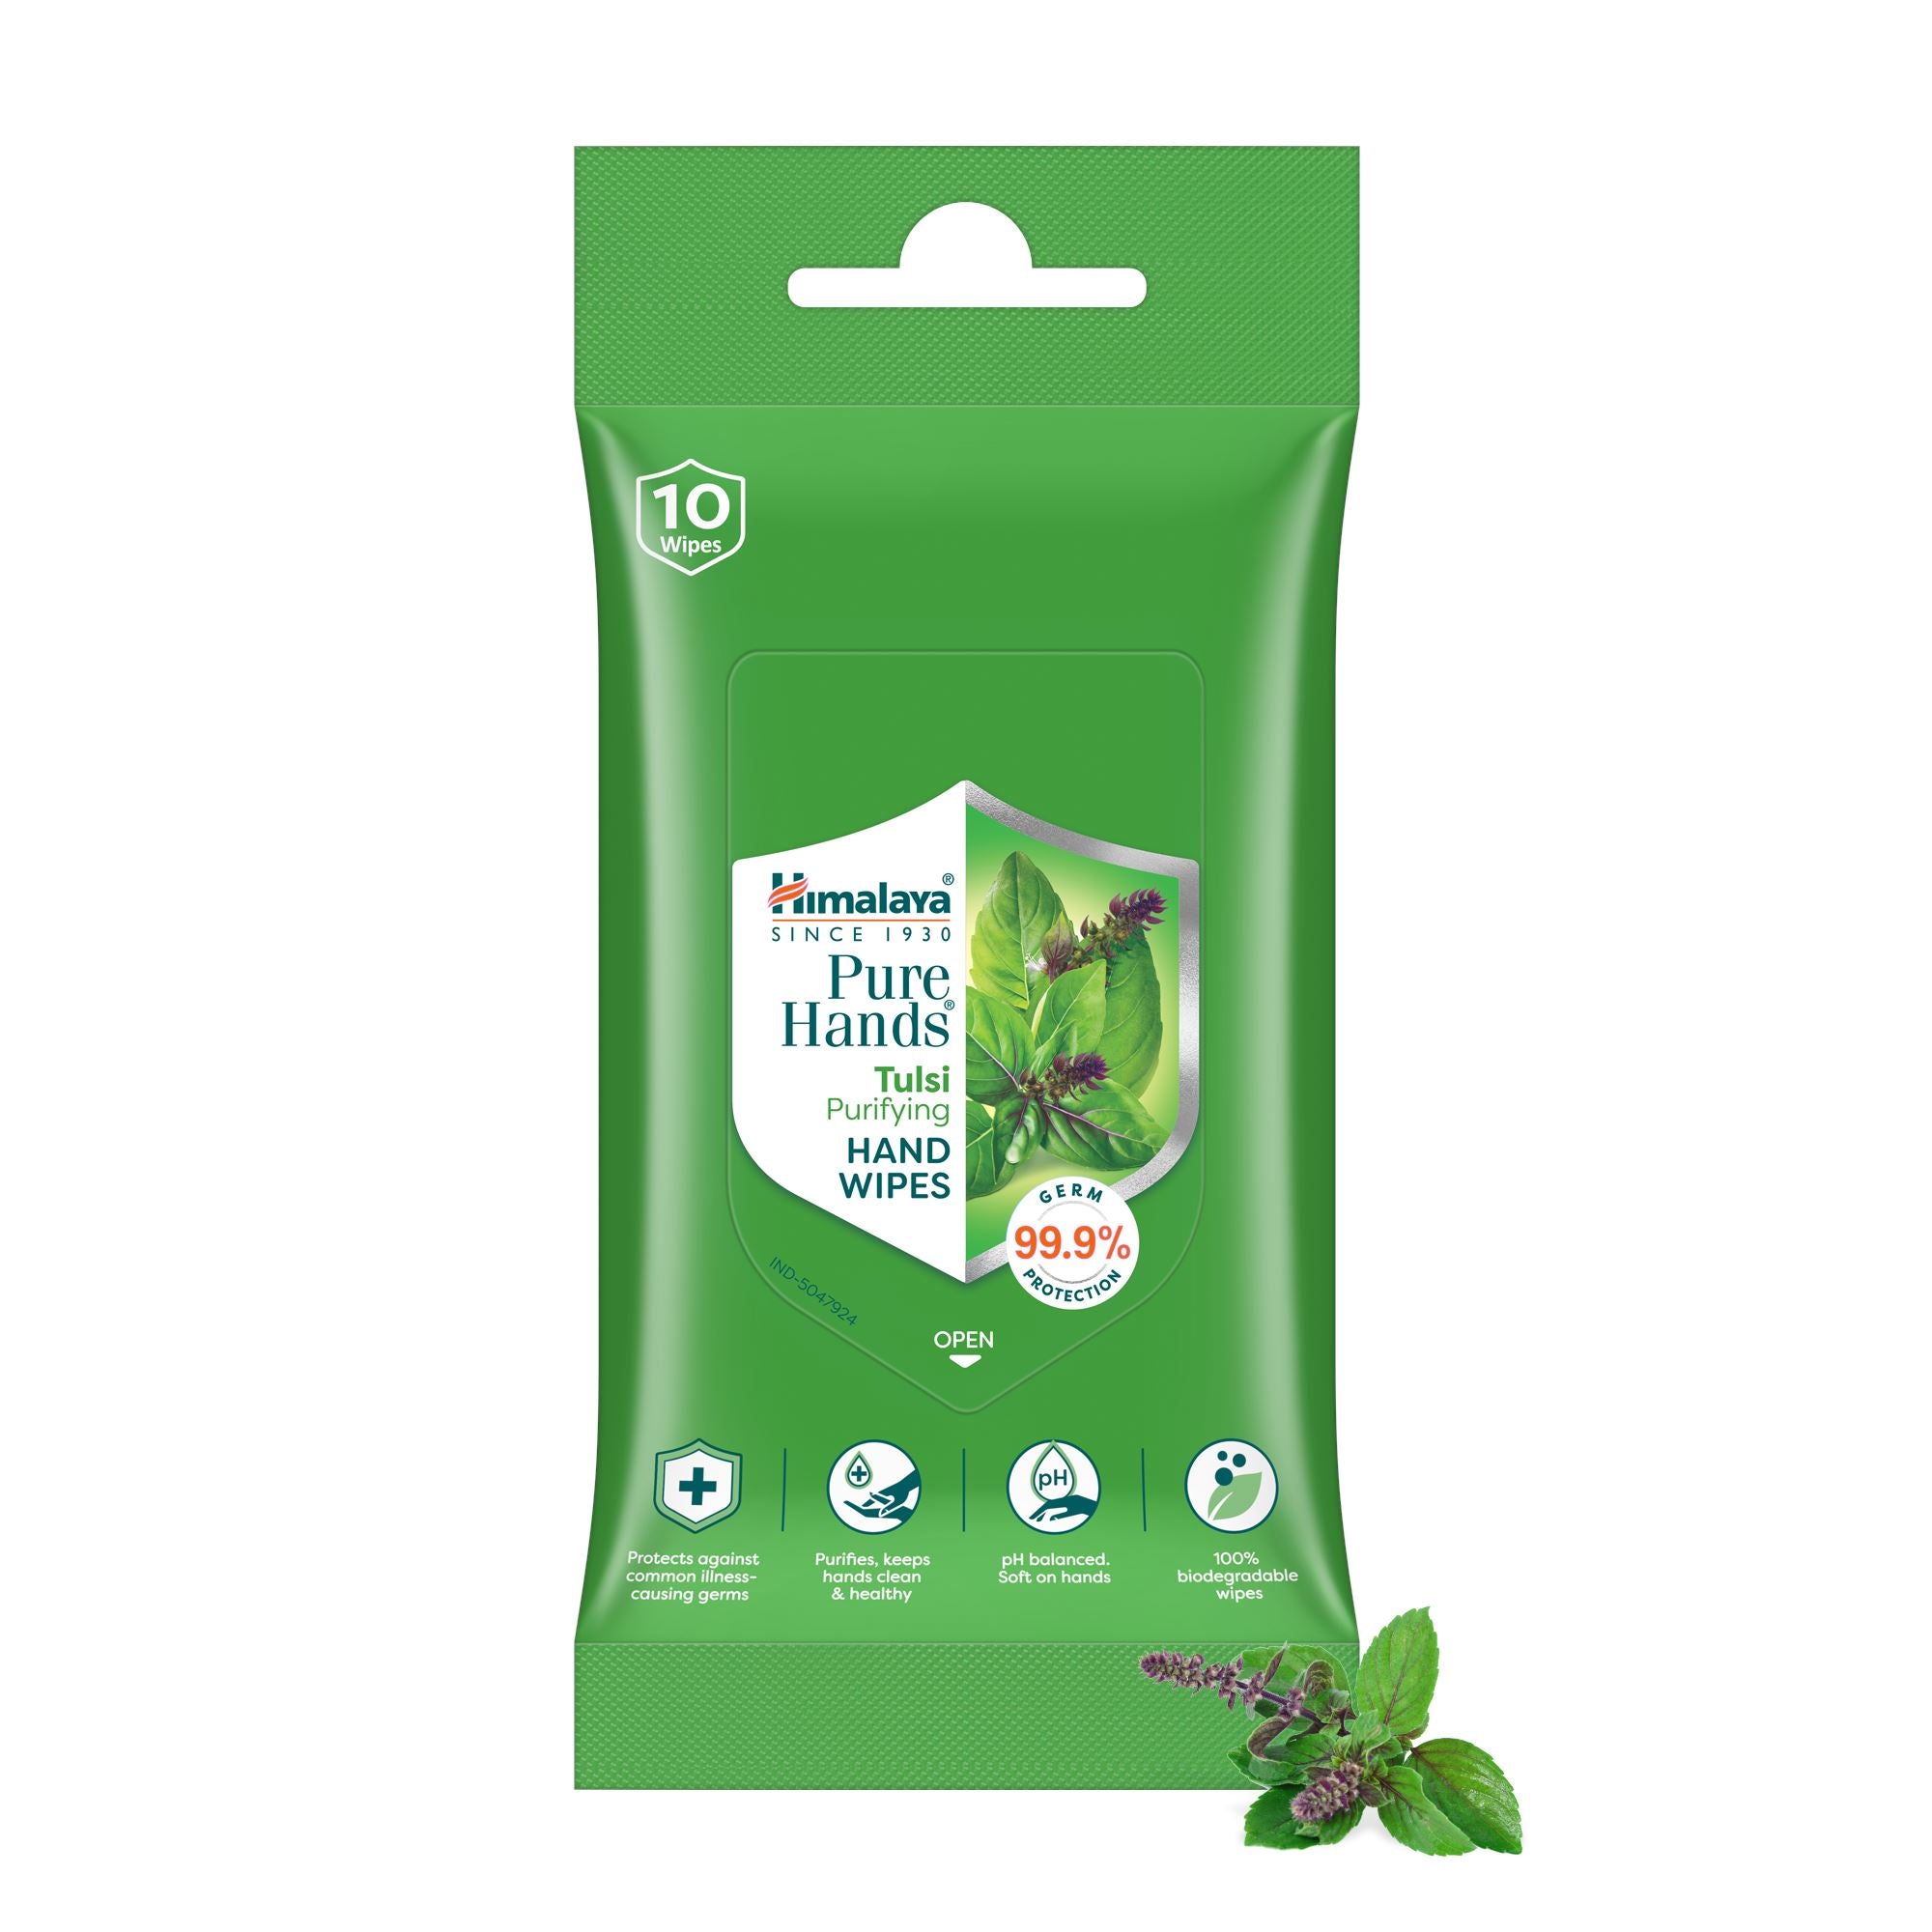 Himalaya Pure Hands Tulsi Purifying Hand Wipes - Sanitizing Wipes 10s